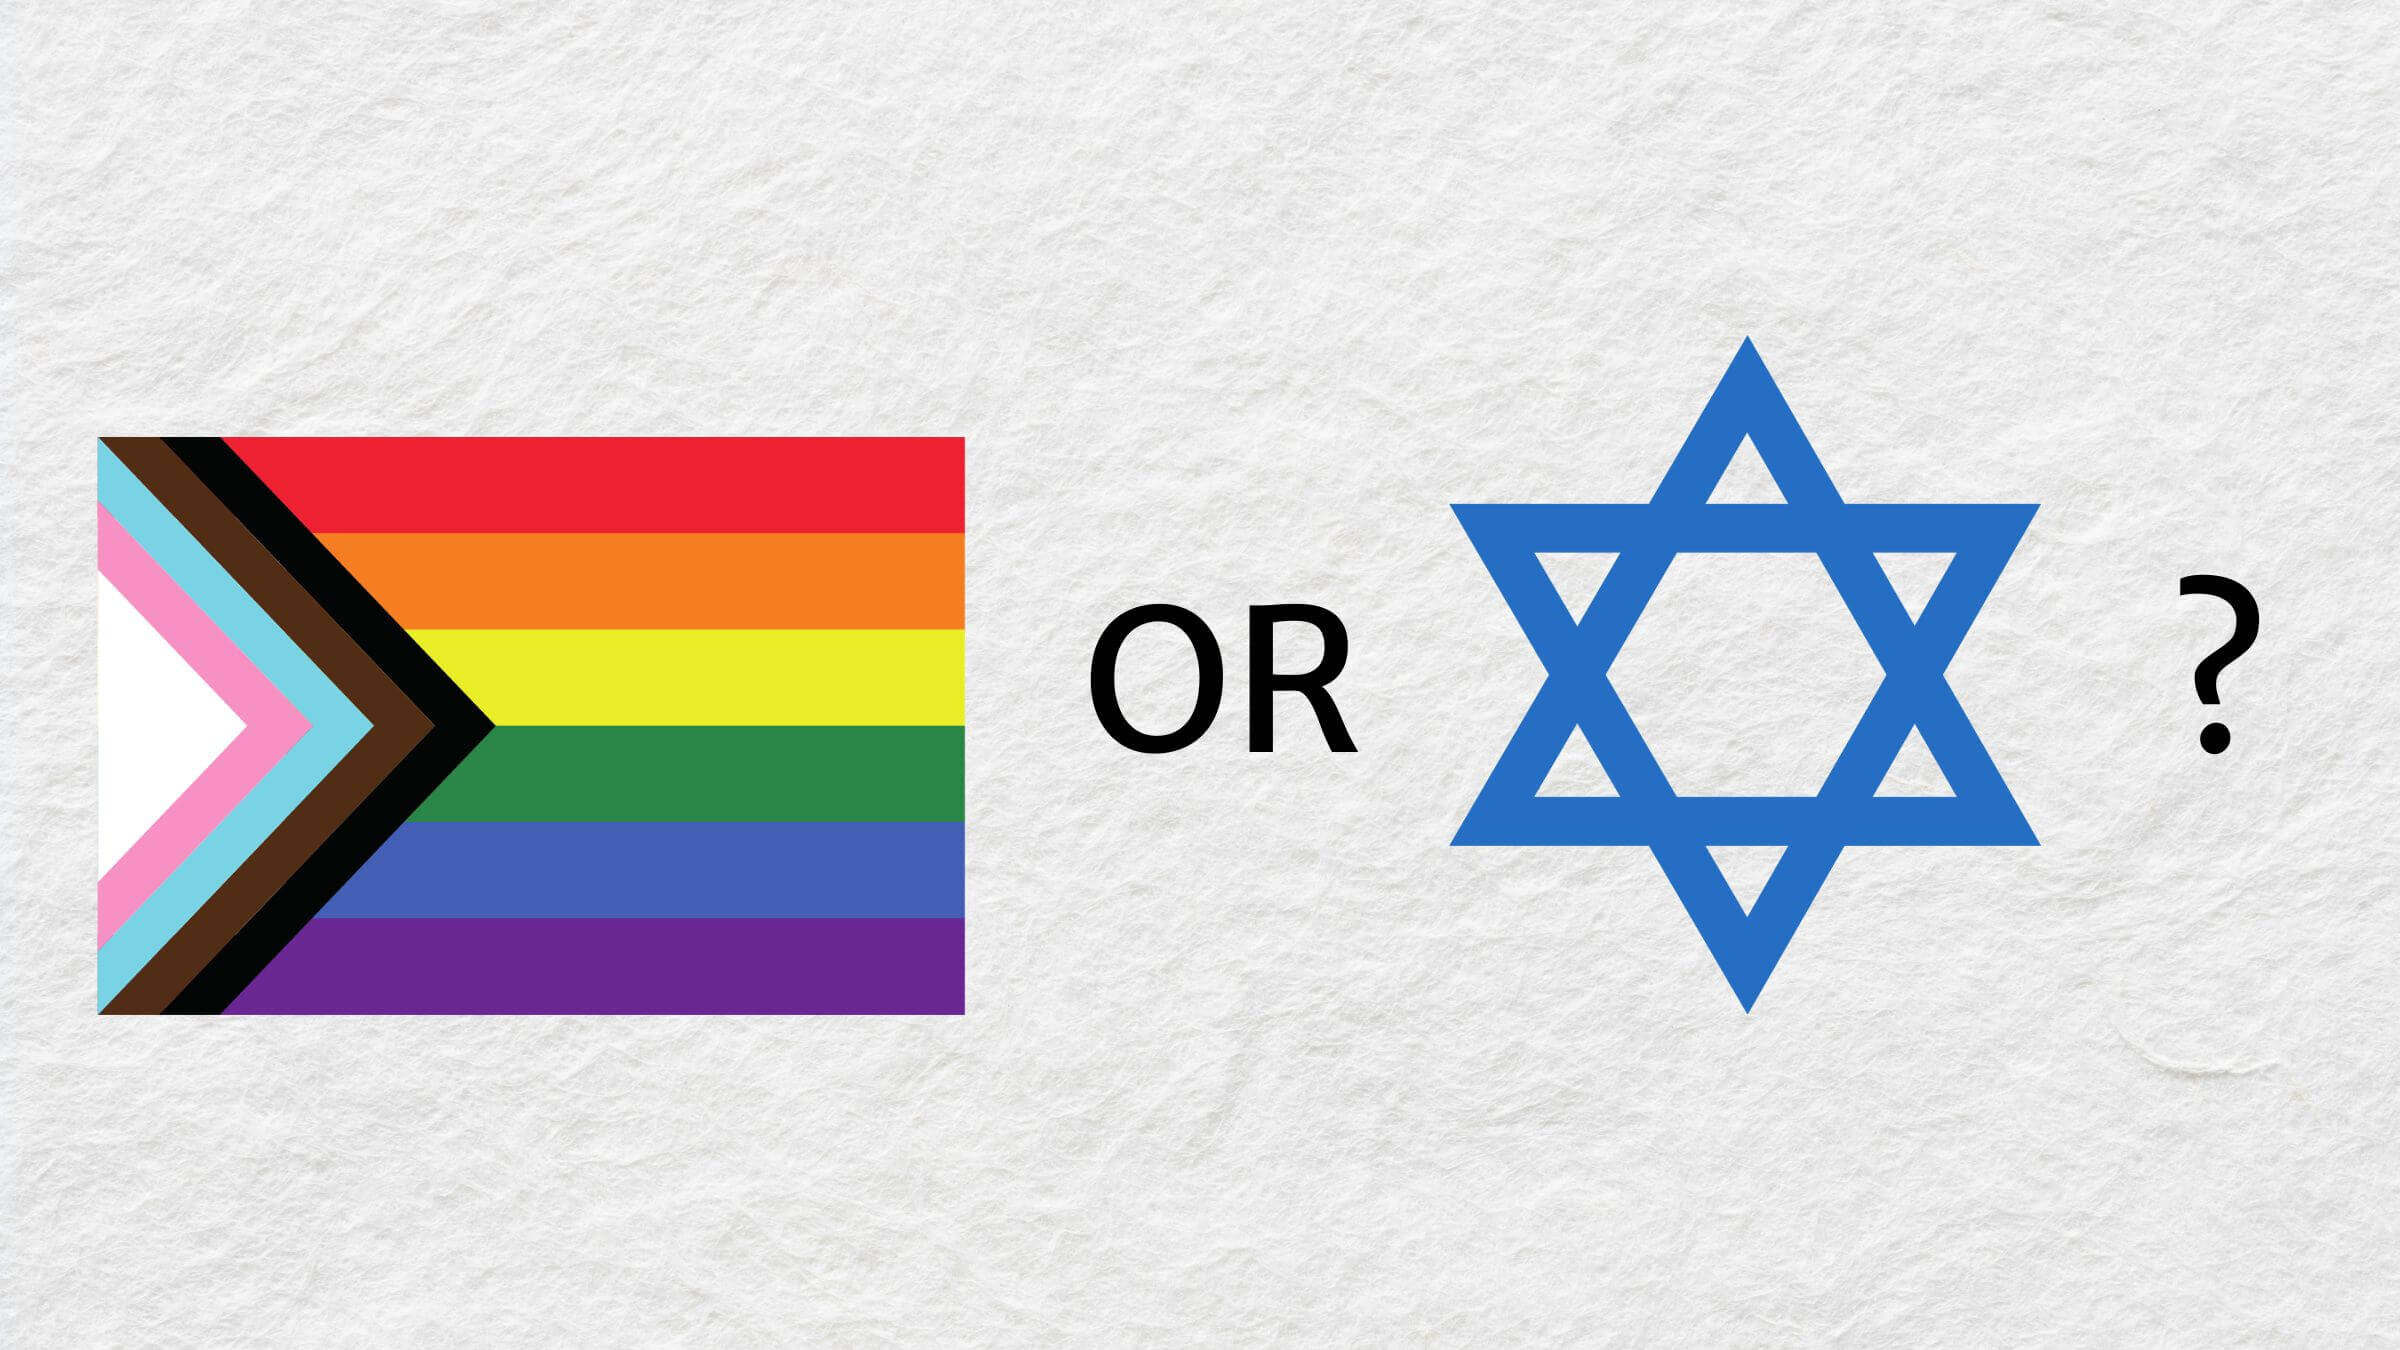 Rice Pride, an LGBTQ+ student group at Rice University, has formally broken ties with Houston Hillel over its Israel standards of partnership.